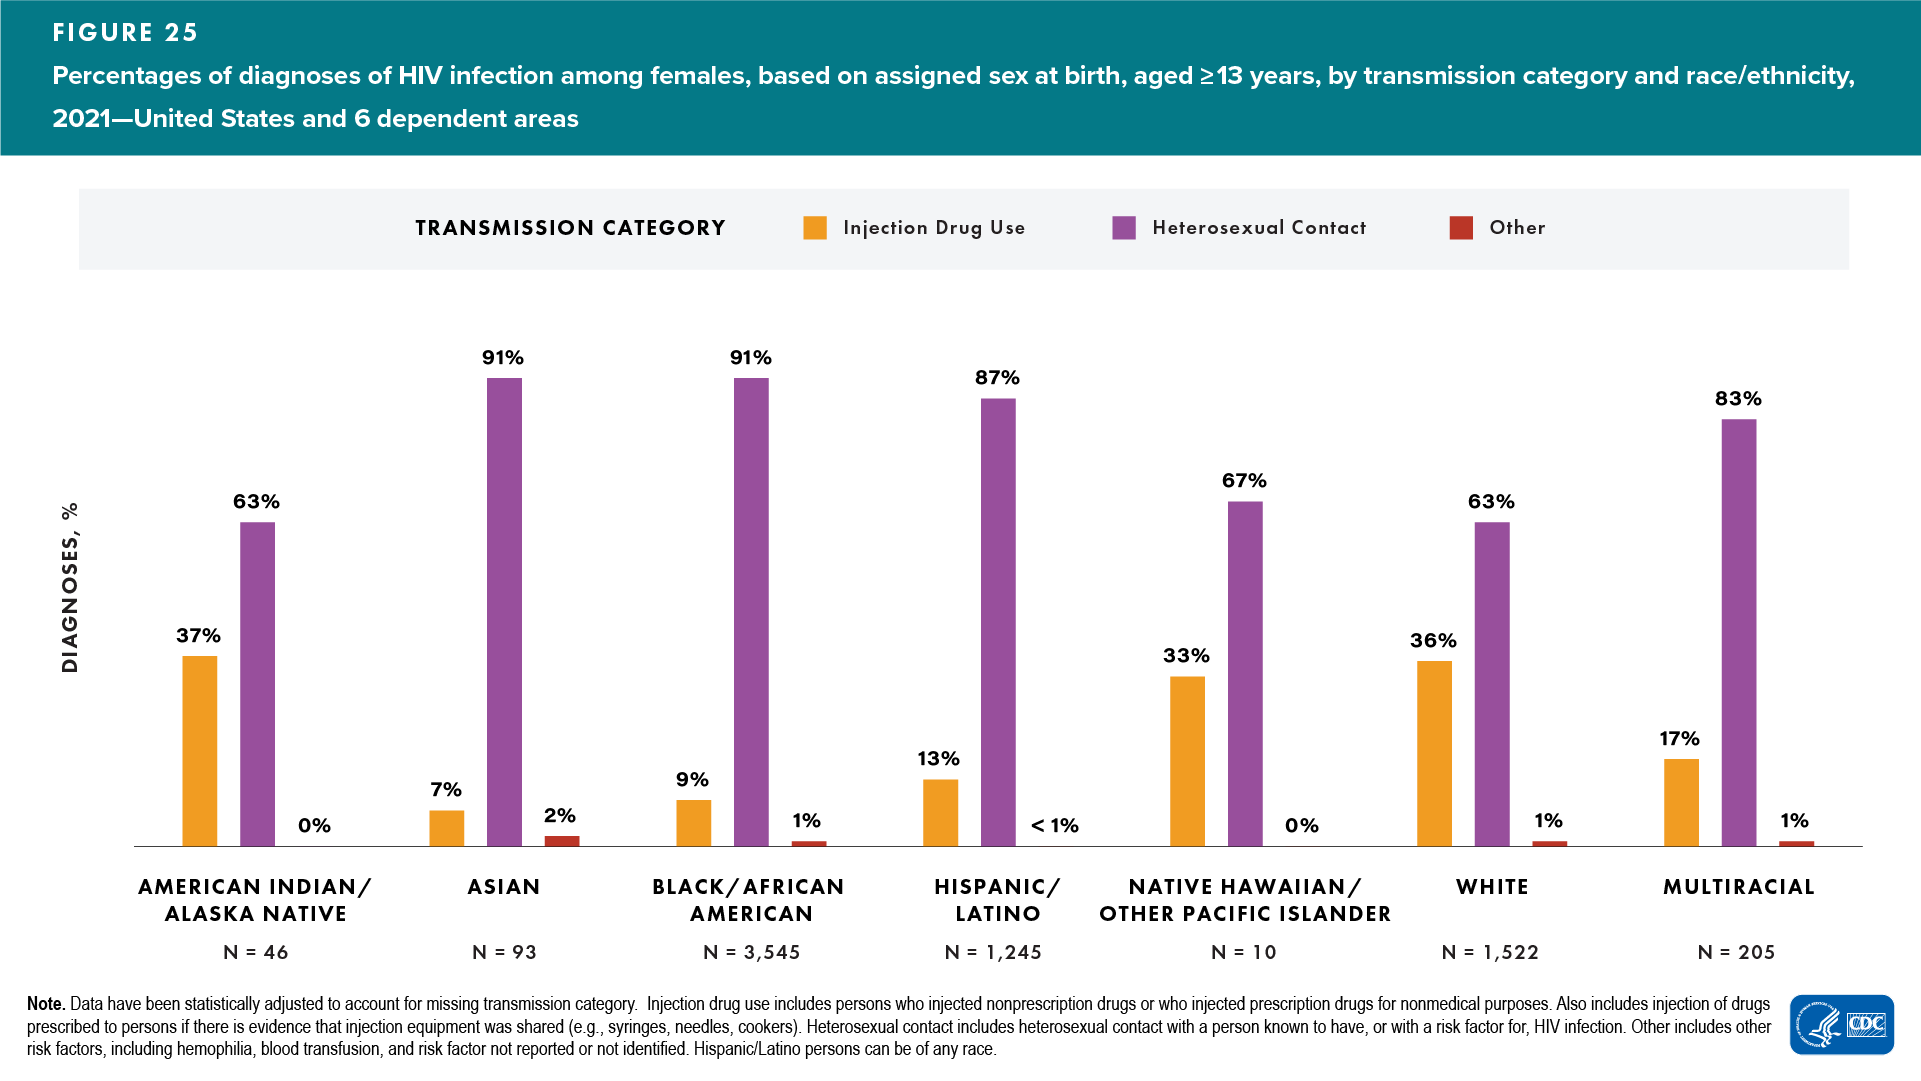 In 2021, in the United States and 6 dependent areas, infections attributed to heterosexual contact had the highest percentage for transmission categories among all females (assigned sex at birth) by race: American Indian/Alaska Native (63%), Asian (91%), Black/African American (91%), Hispanic/Latino (87%), Native Hawaiian/other Pacific Islander (67%), White (63%), and multiracial (83%).